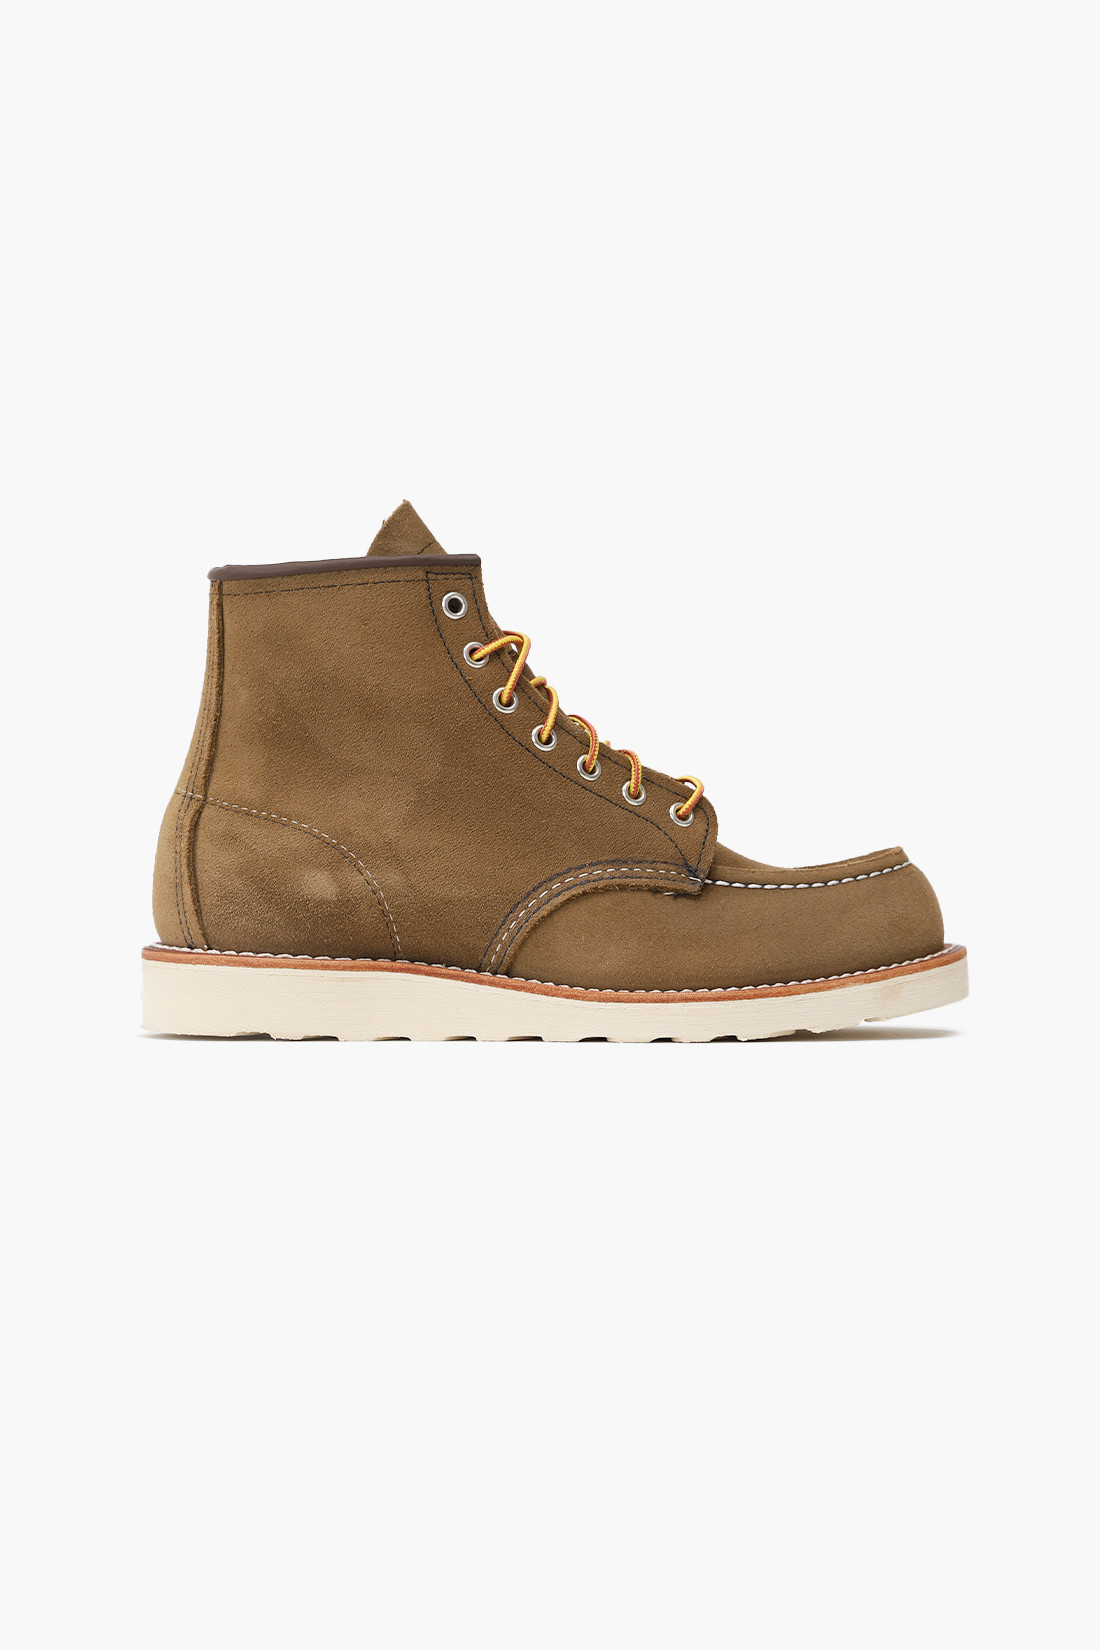 Red wing 8881 6'' classic moc toe Olive mohave - GRADUATE STORE | EN